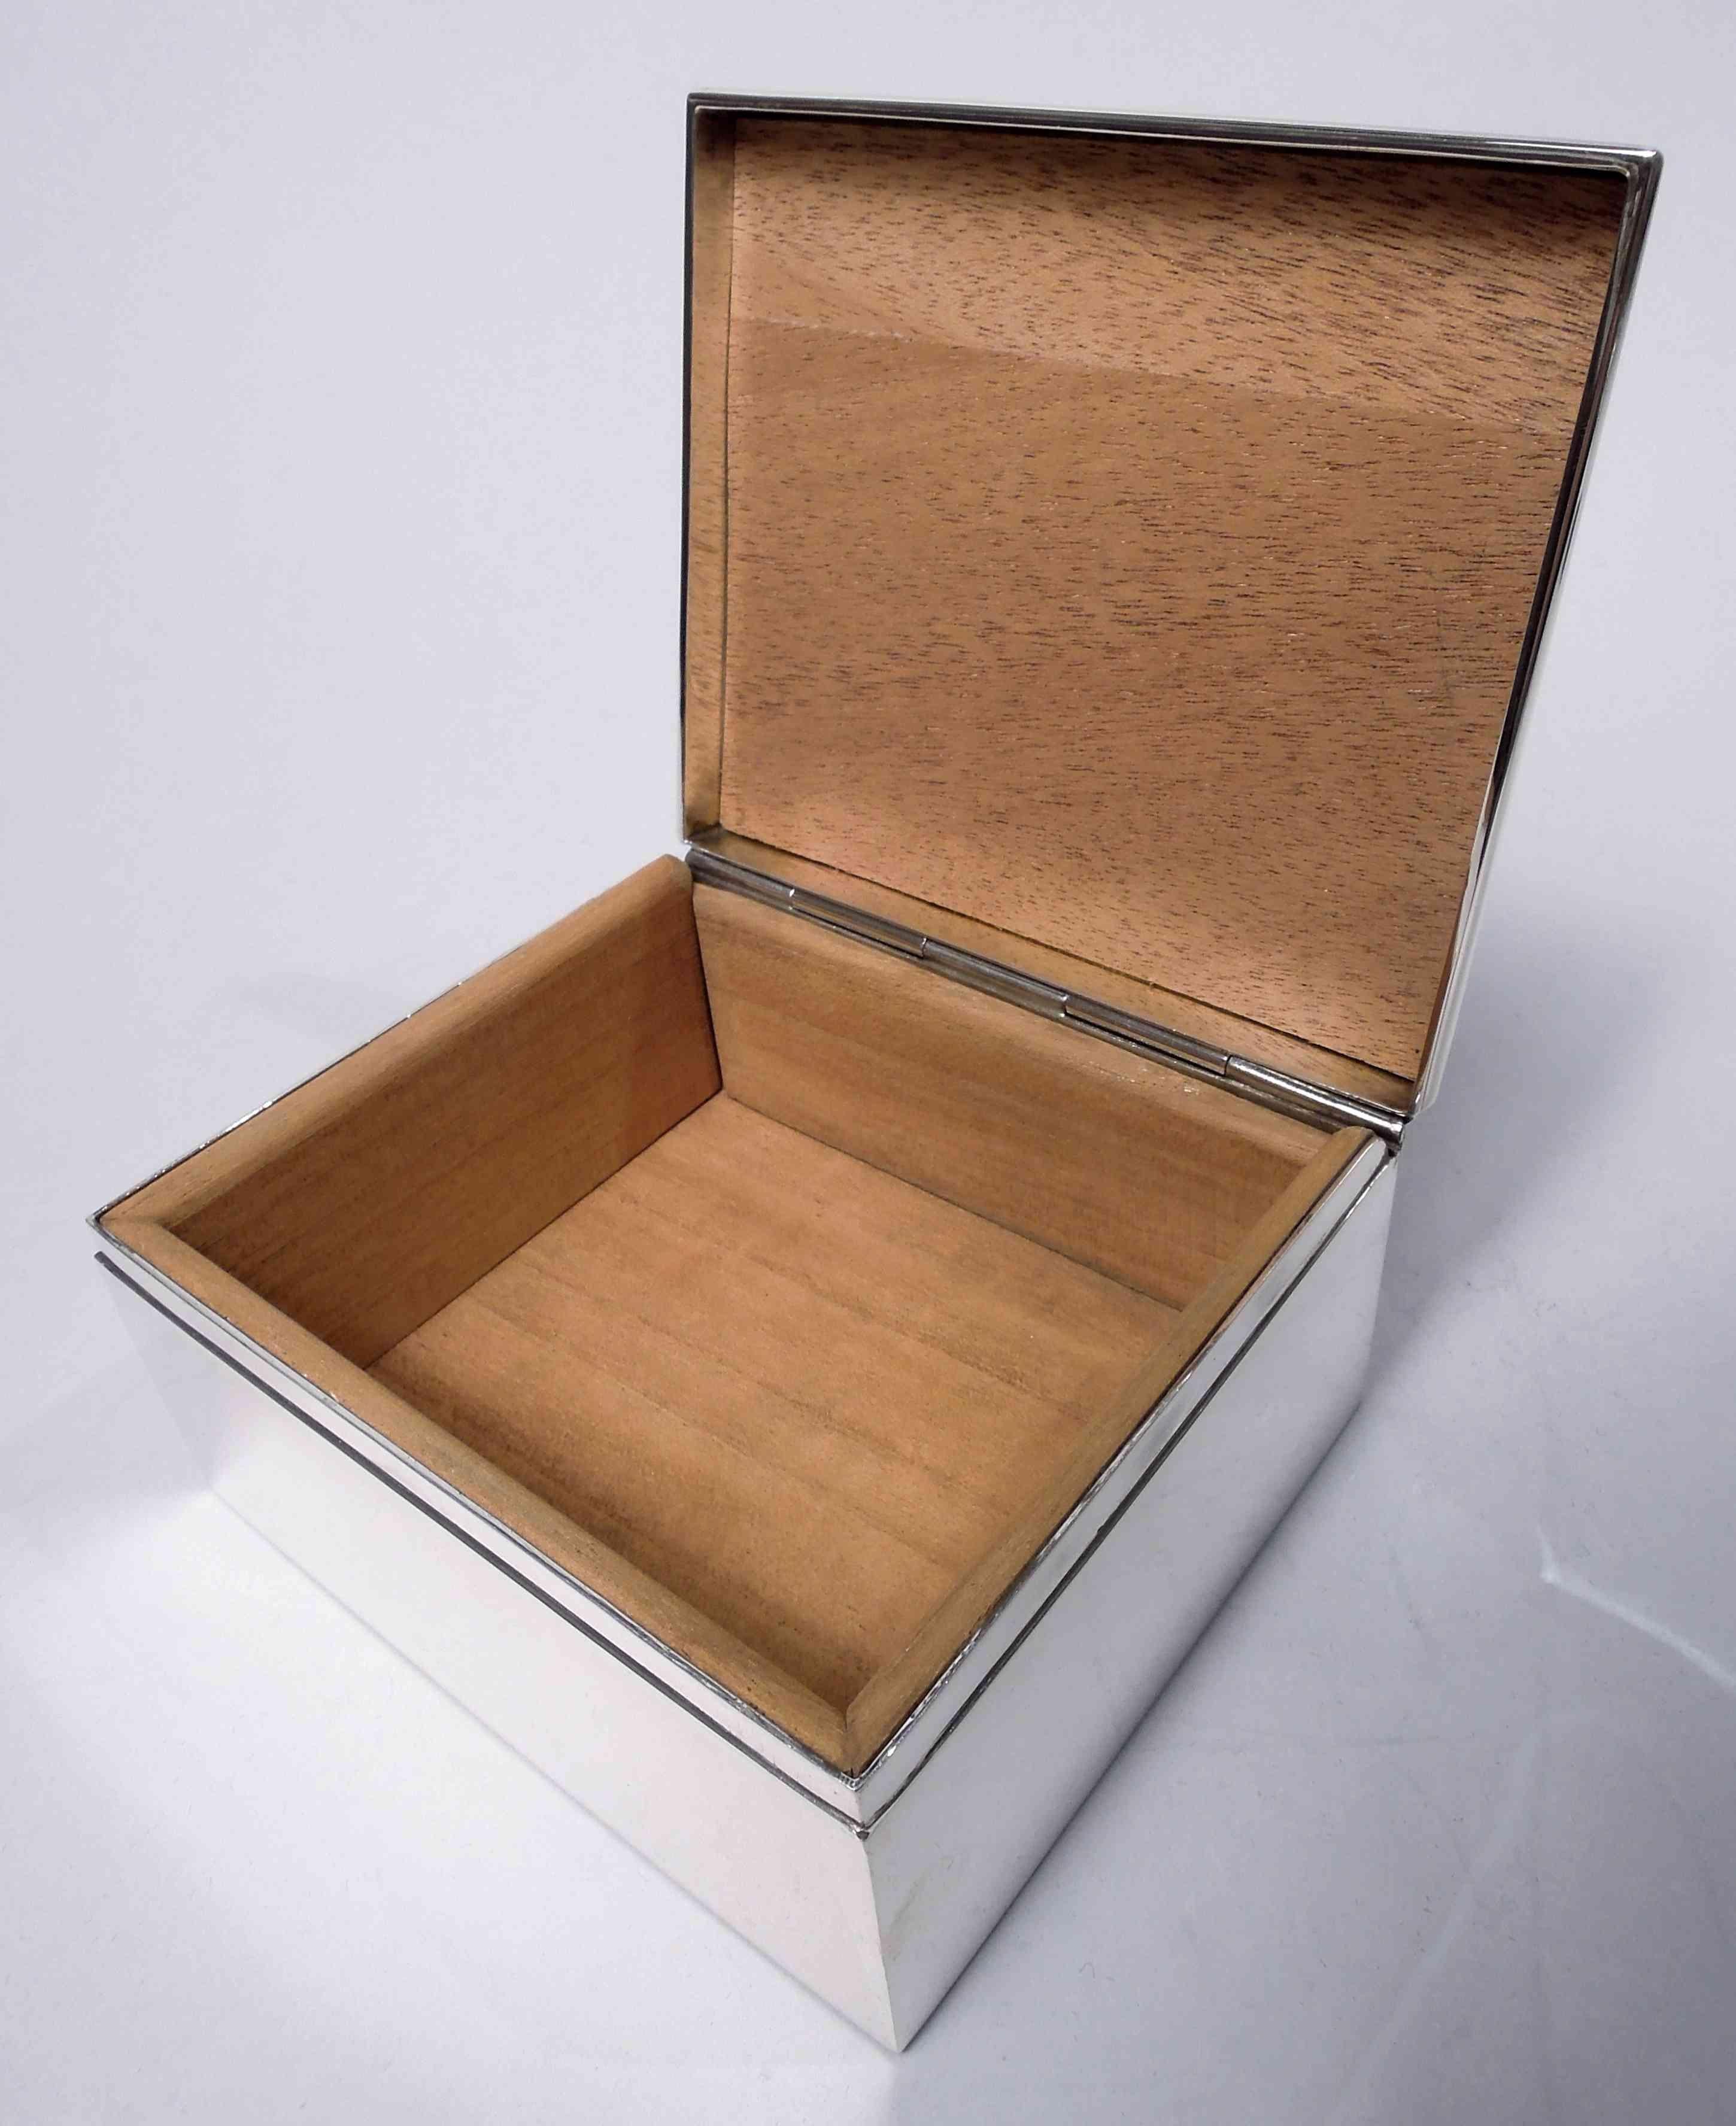 20th Century Cartier American Modern Sterling Silver Box For Sale